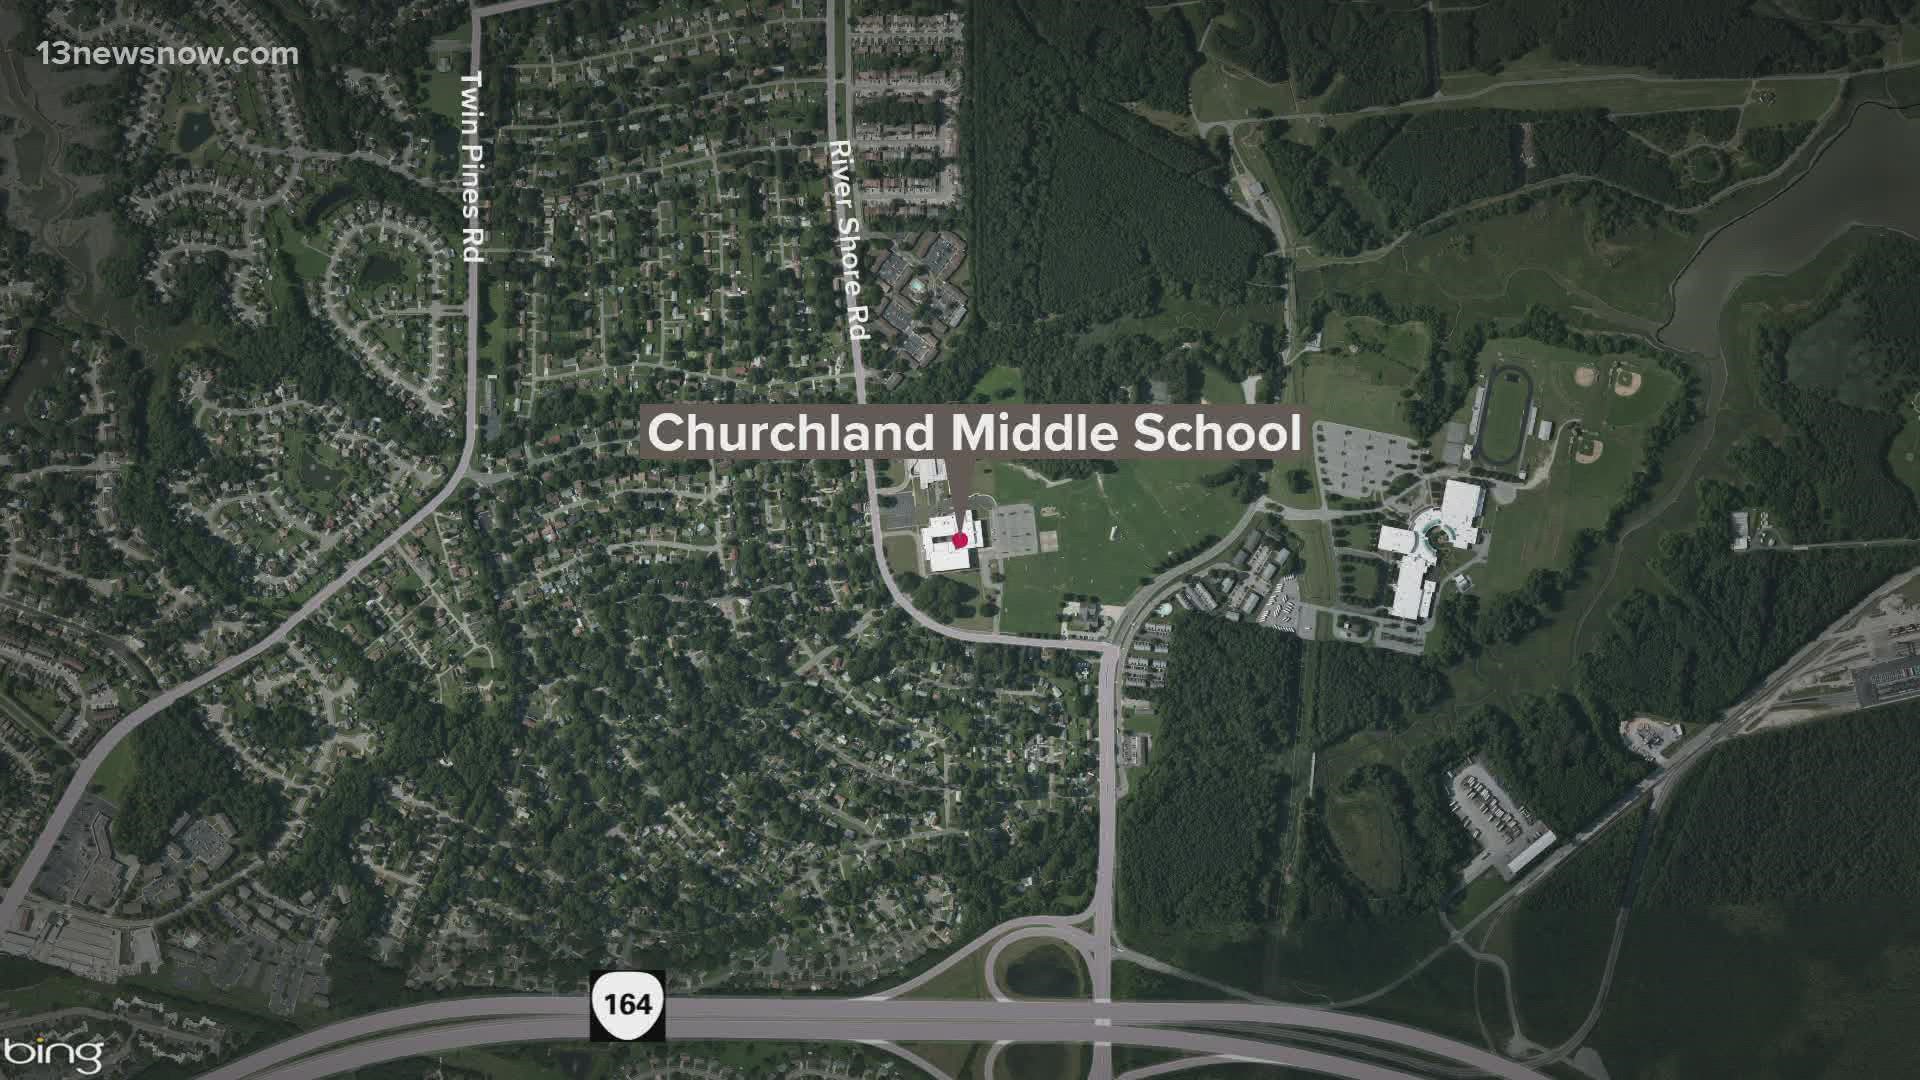 We're told the crash happened near Churchland Middle School around 7:45 a.m Thursday